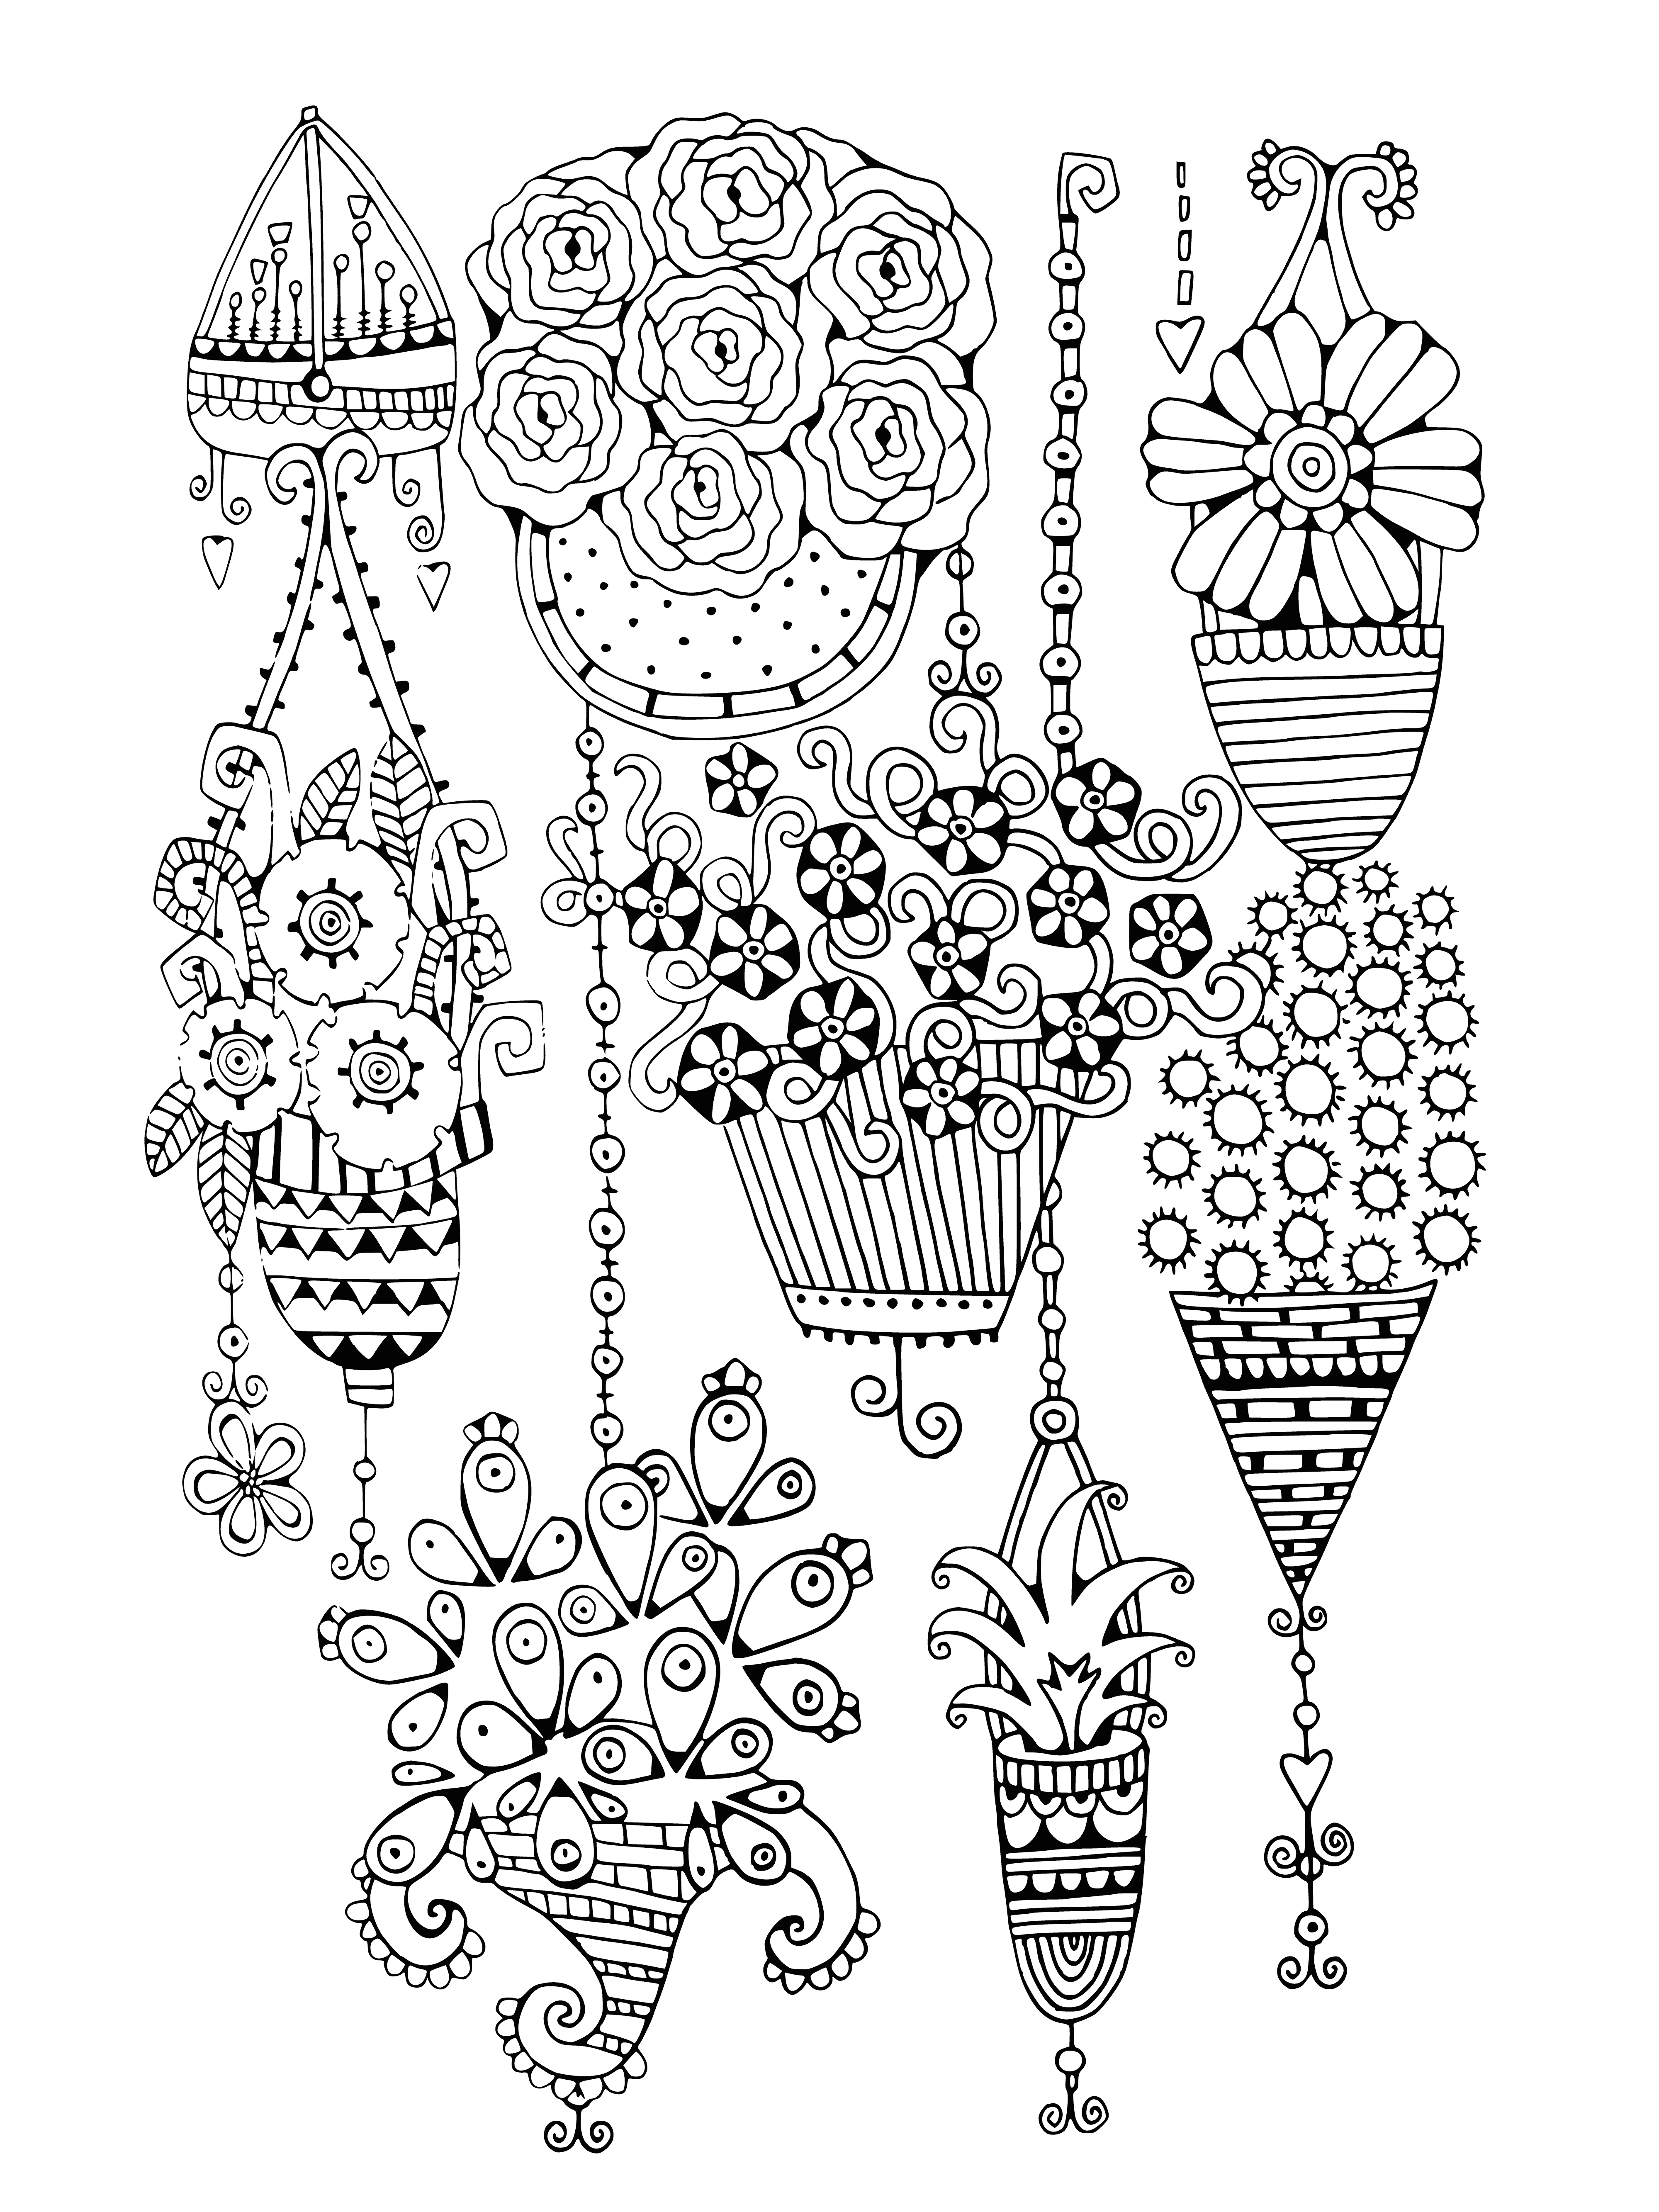 coloring page: 3 flowers in pots: yellow, pink, & purple. All have yellow centers & green leaves. #coloringpage